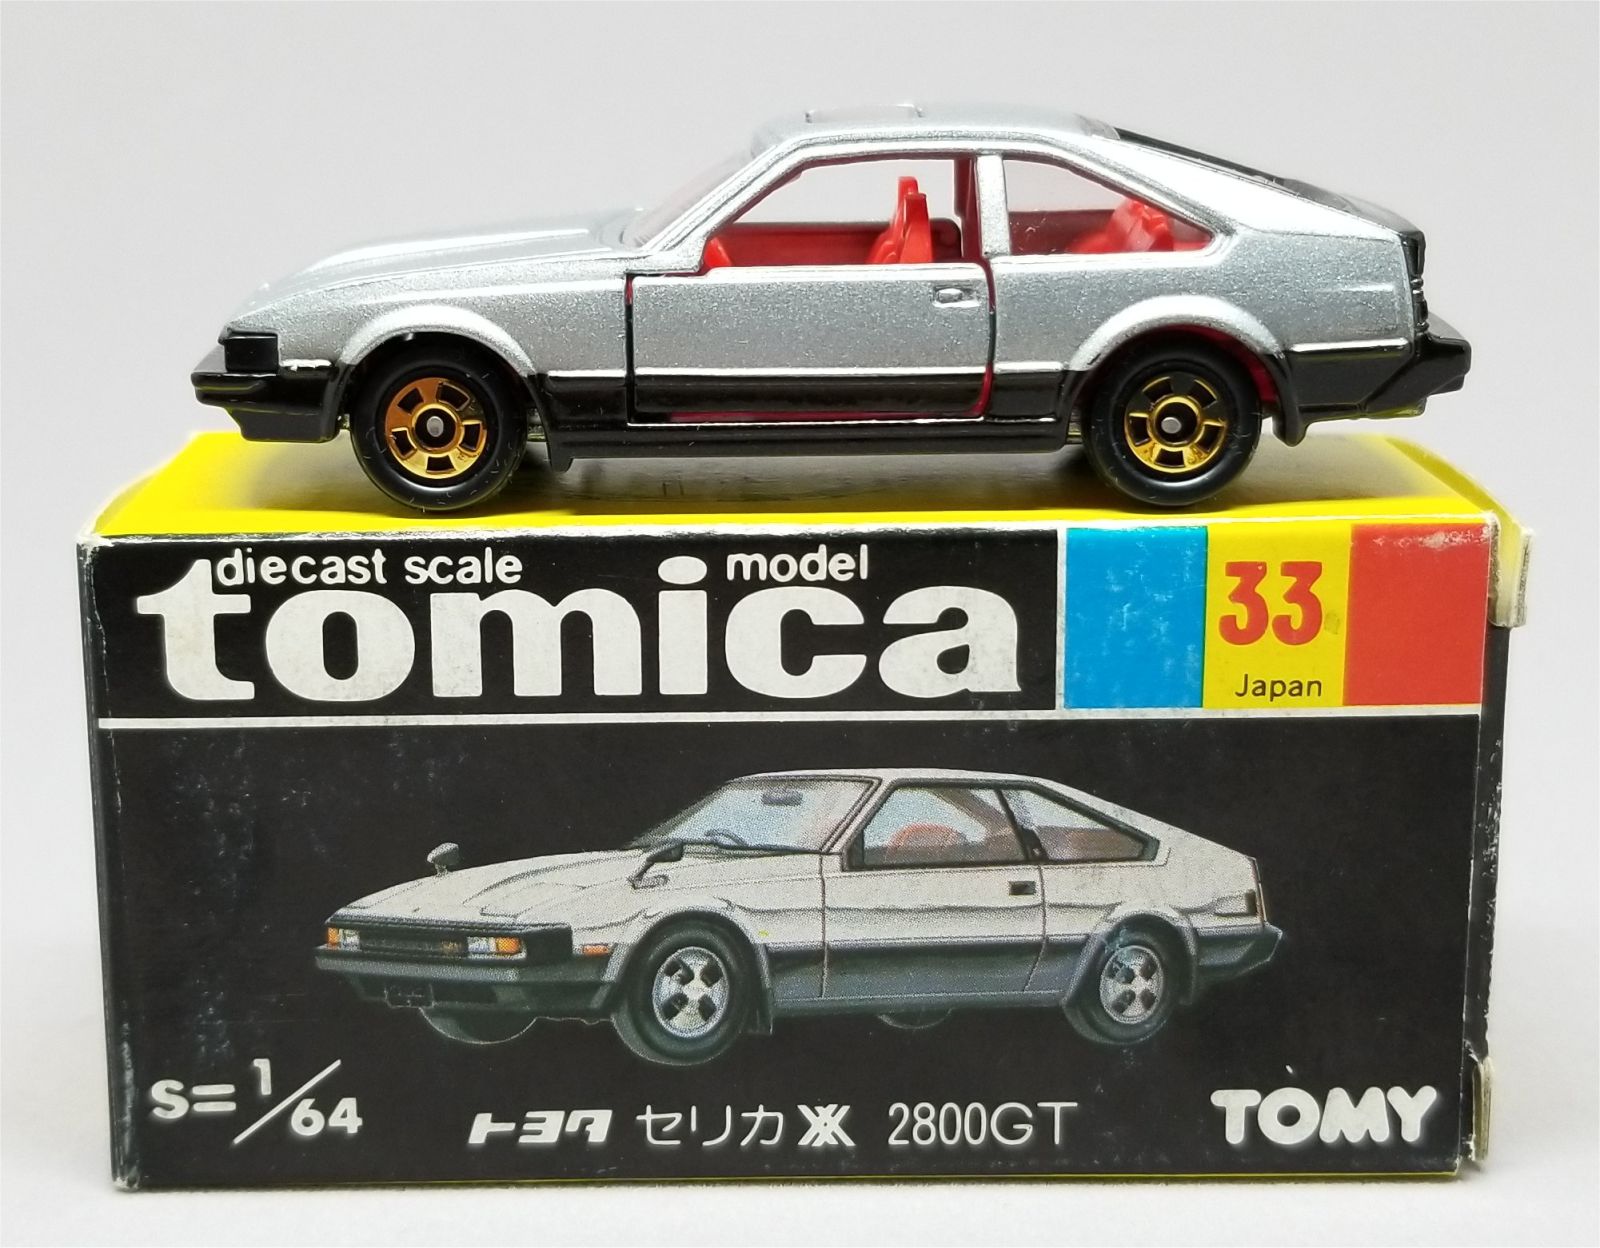 Illustration for article titled Radcast 2018: Tomica Toyota Celica XX 2800 GT